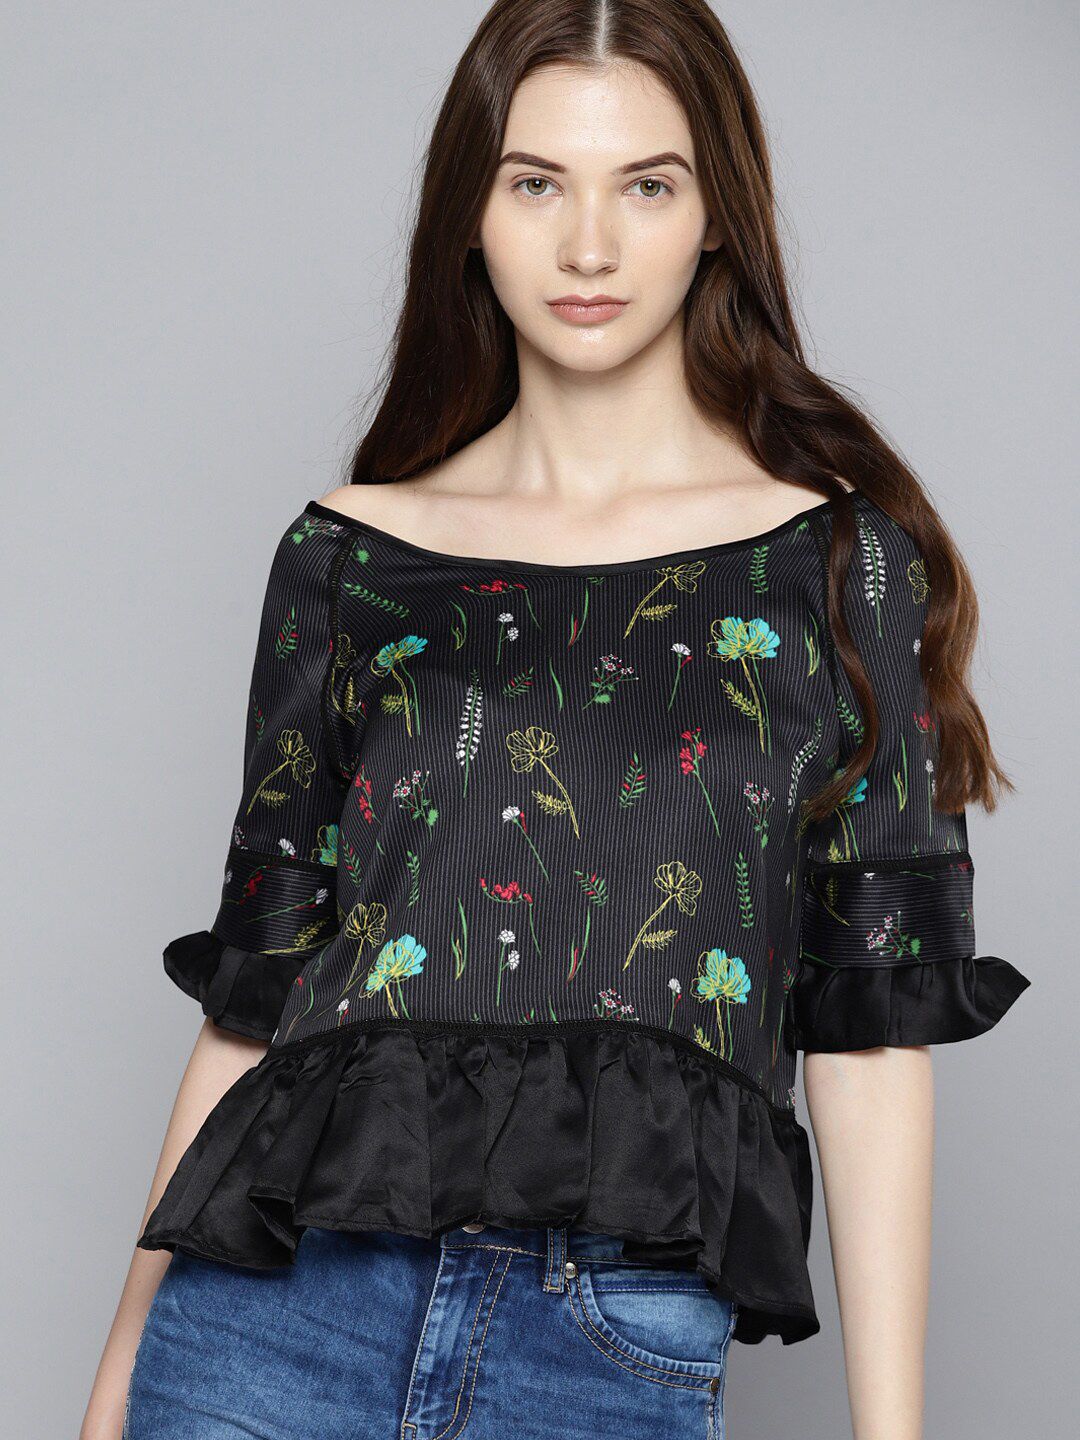 Mast & Harbour Black & Green Floral Print Bell Sleeve Top Price in India